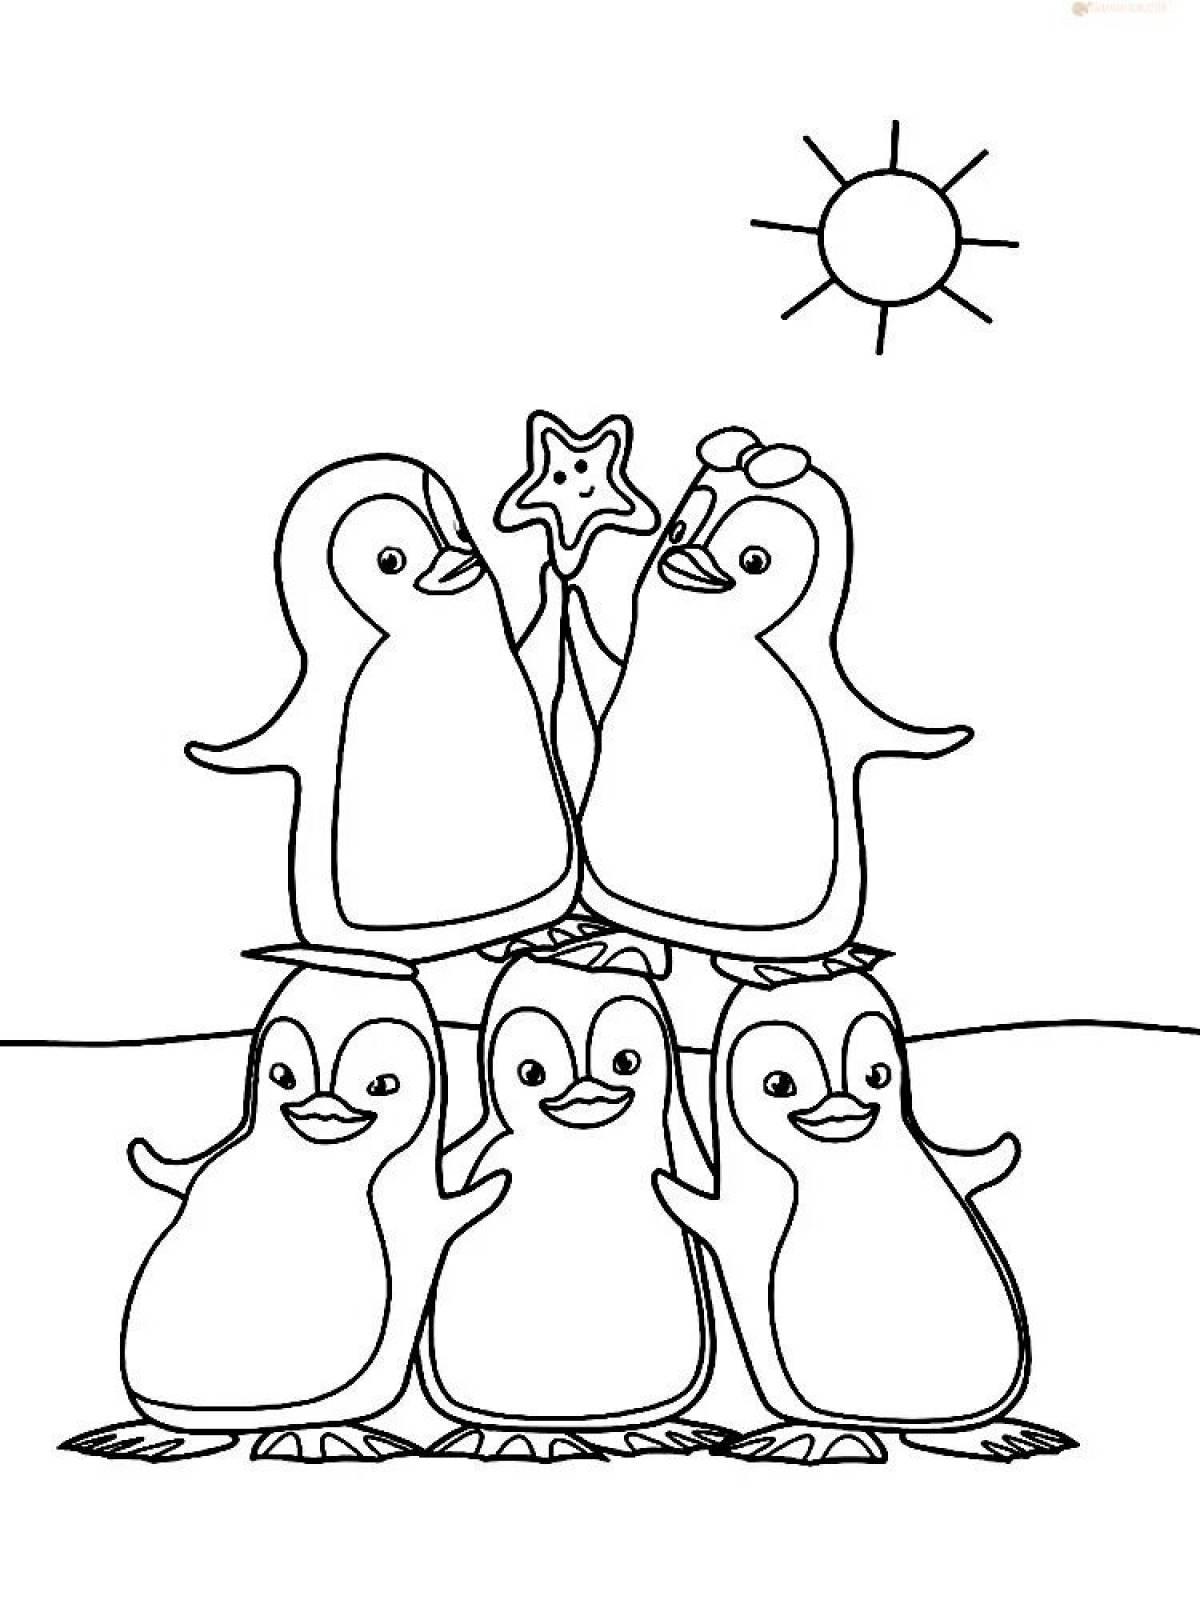 Penguin coloring book for kids